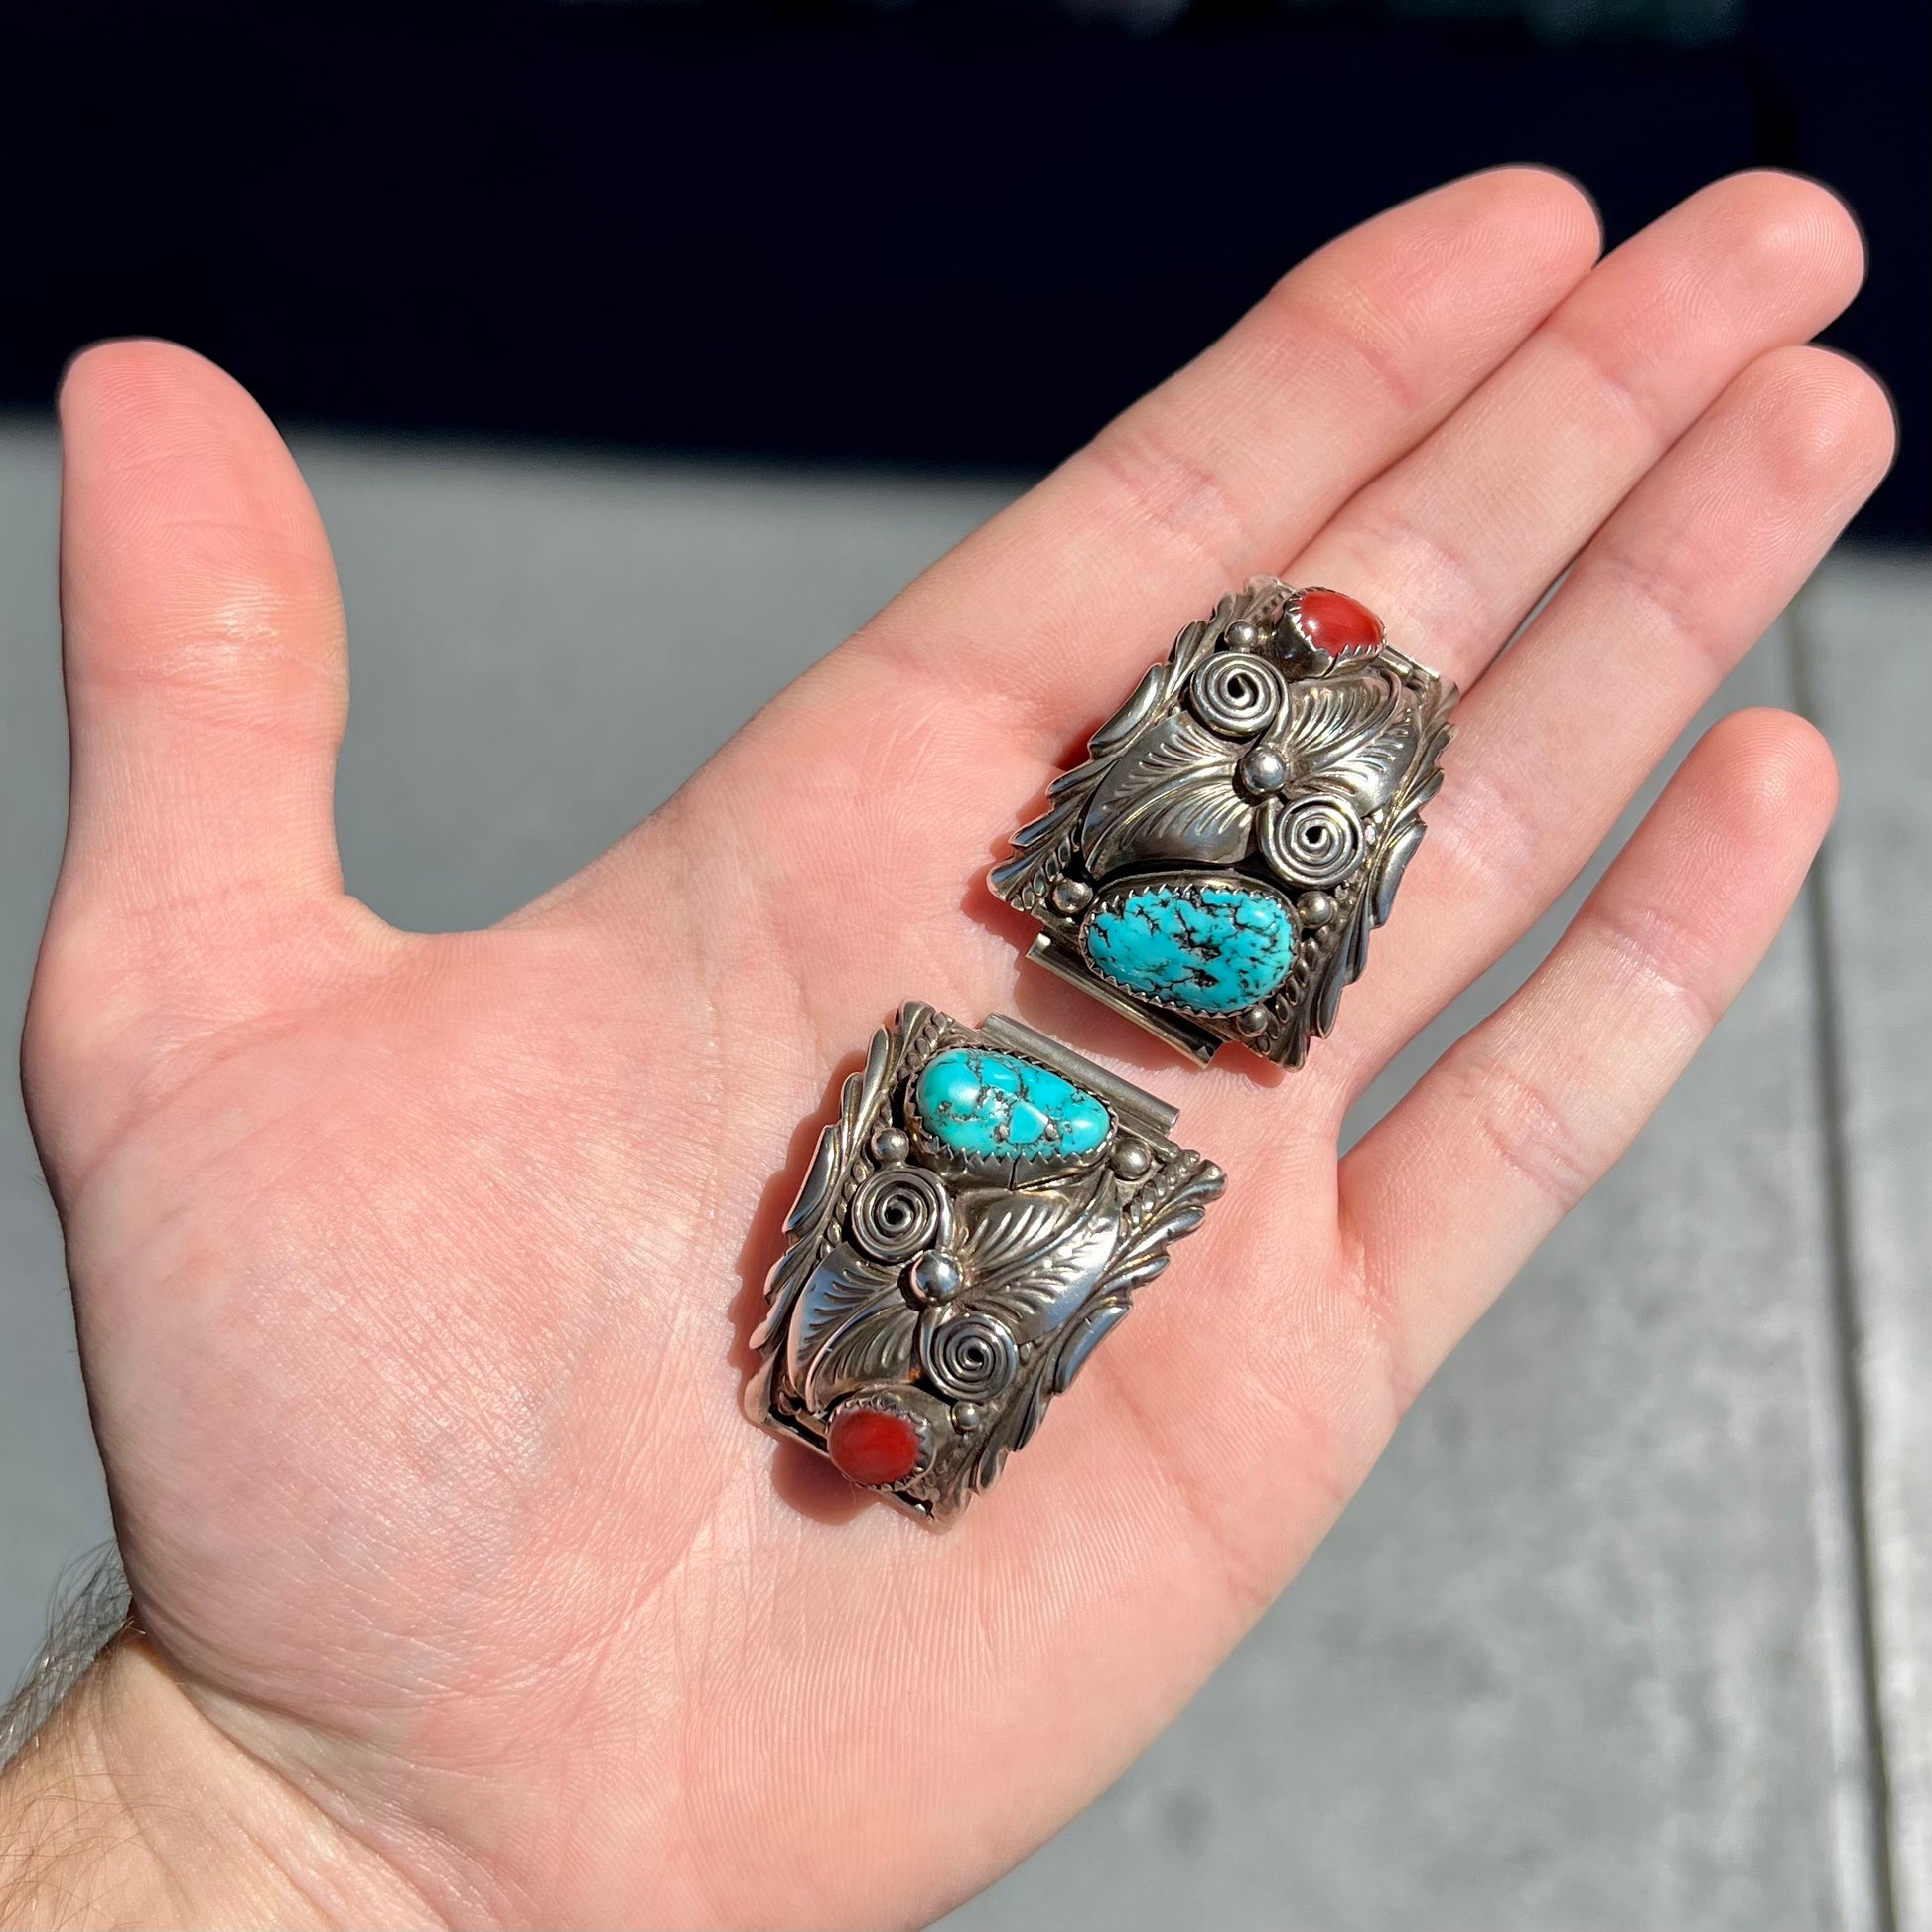 A pair of sterling silver watch cuffs set with turquoise and coral stones.